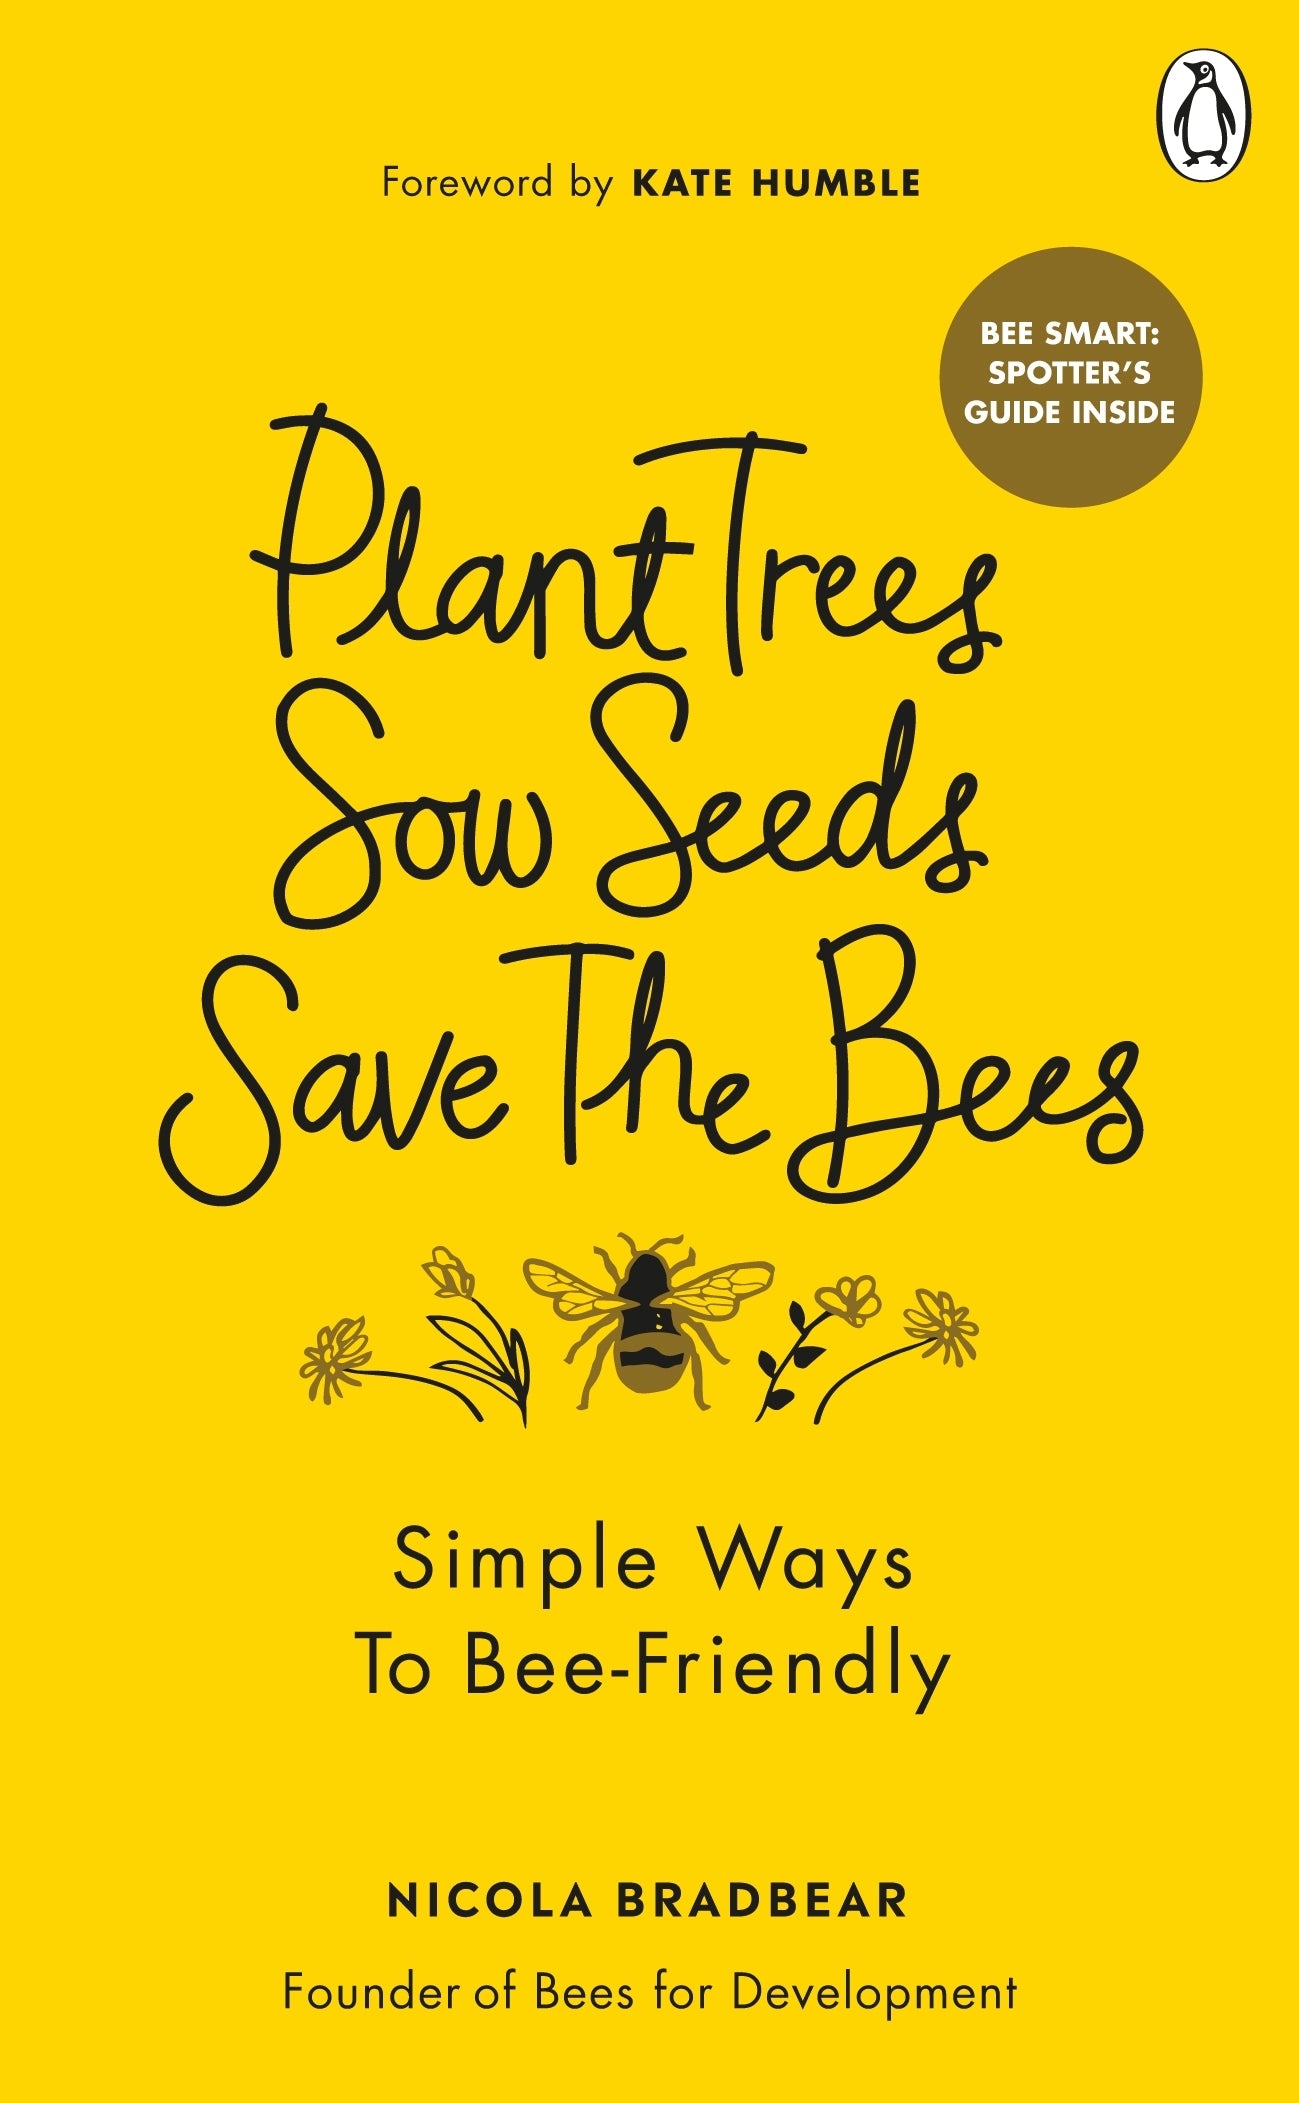 'Plant Trees, Sow Seeds, Save the Bees' by Nicola Bradbear